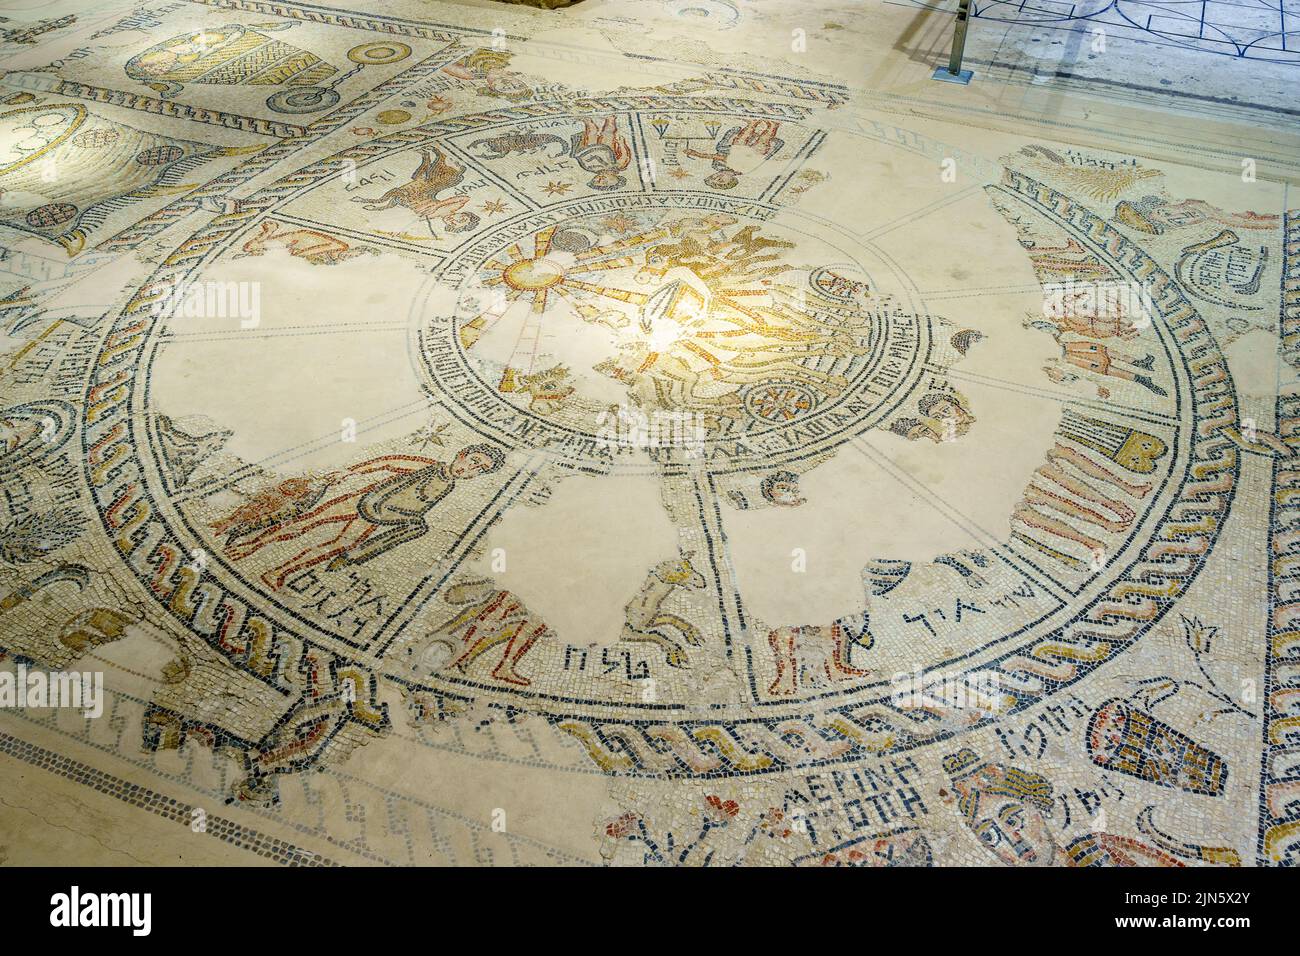 View of a Roman era Mosaic floor, with zodiac and biblical scenes, in an ancient Synagogue, Tzipori (Sepphoris) National Park, Northern Israel Stock Photo